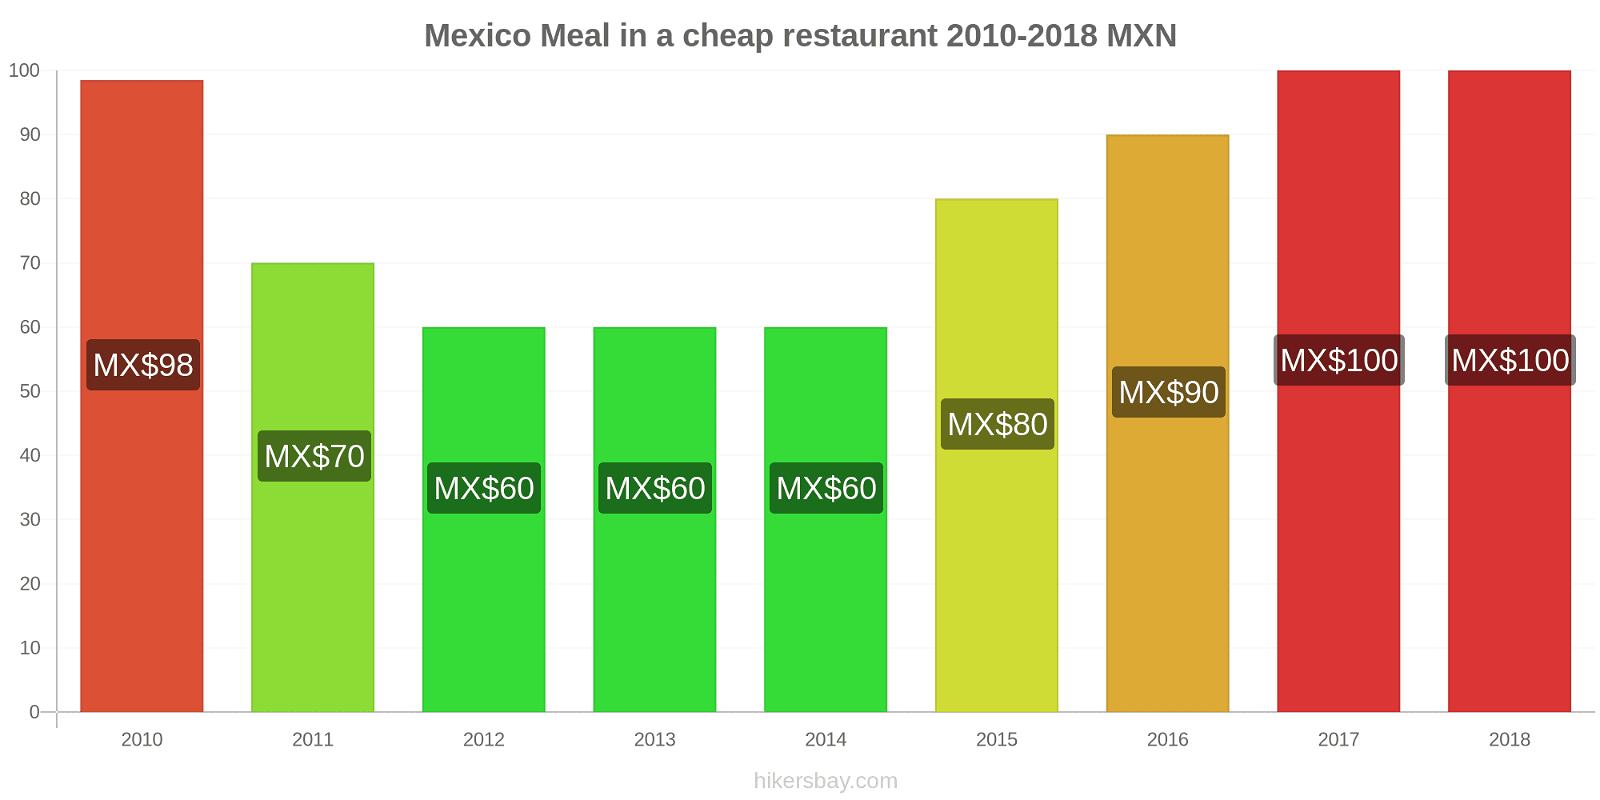 Mexico price changes Meal in a cheap restaurant hikersbay.com